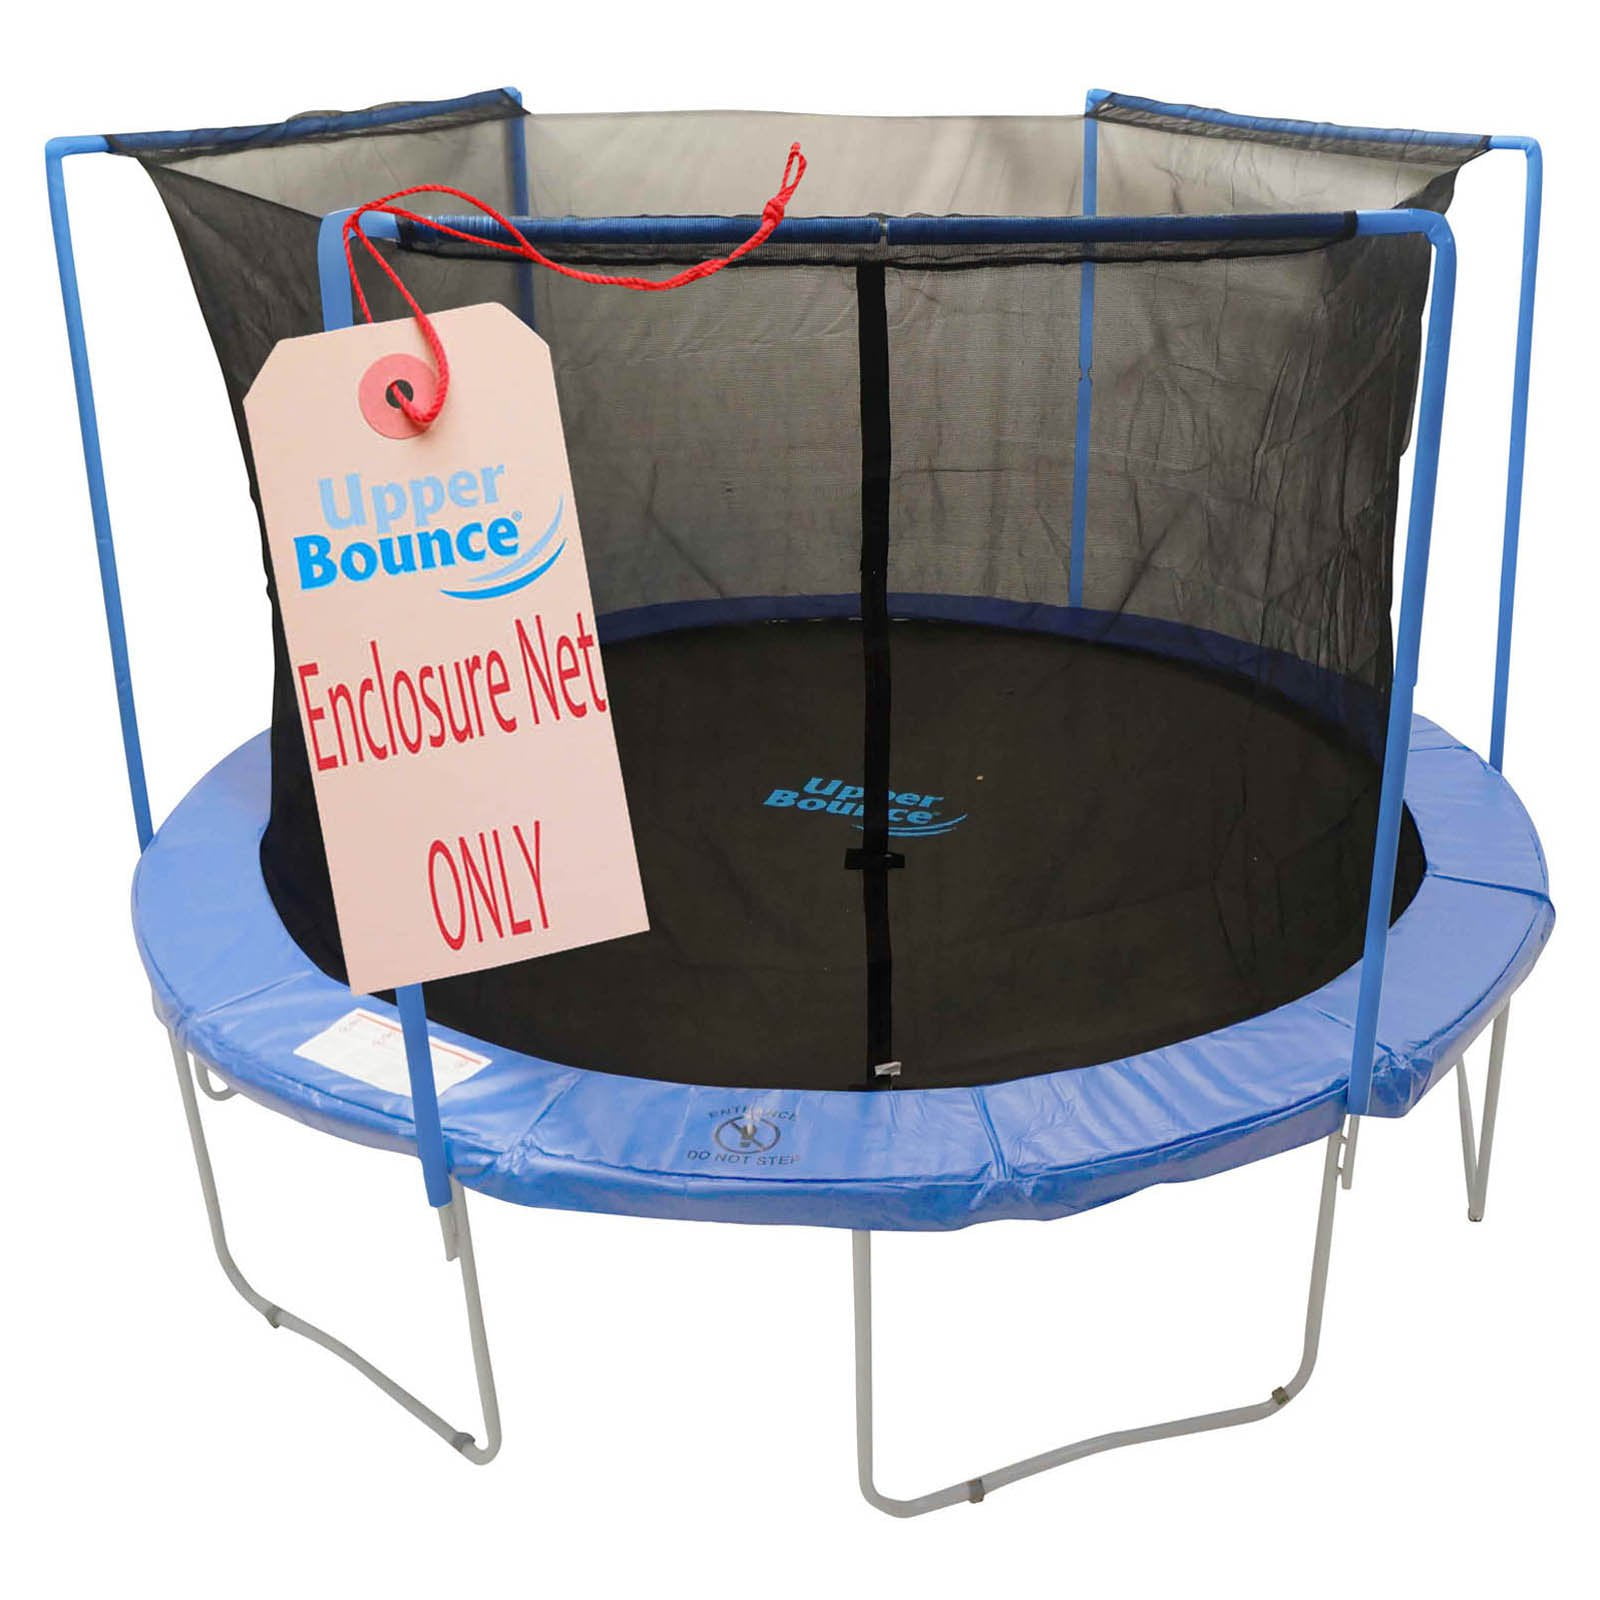 North Gear 7ft Kids Trampoline with Safety Enclosure Net 